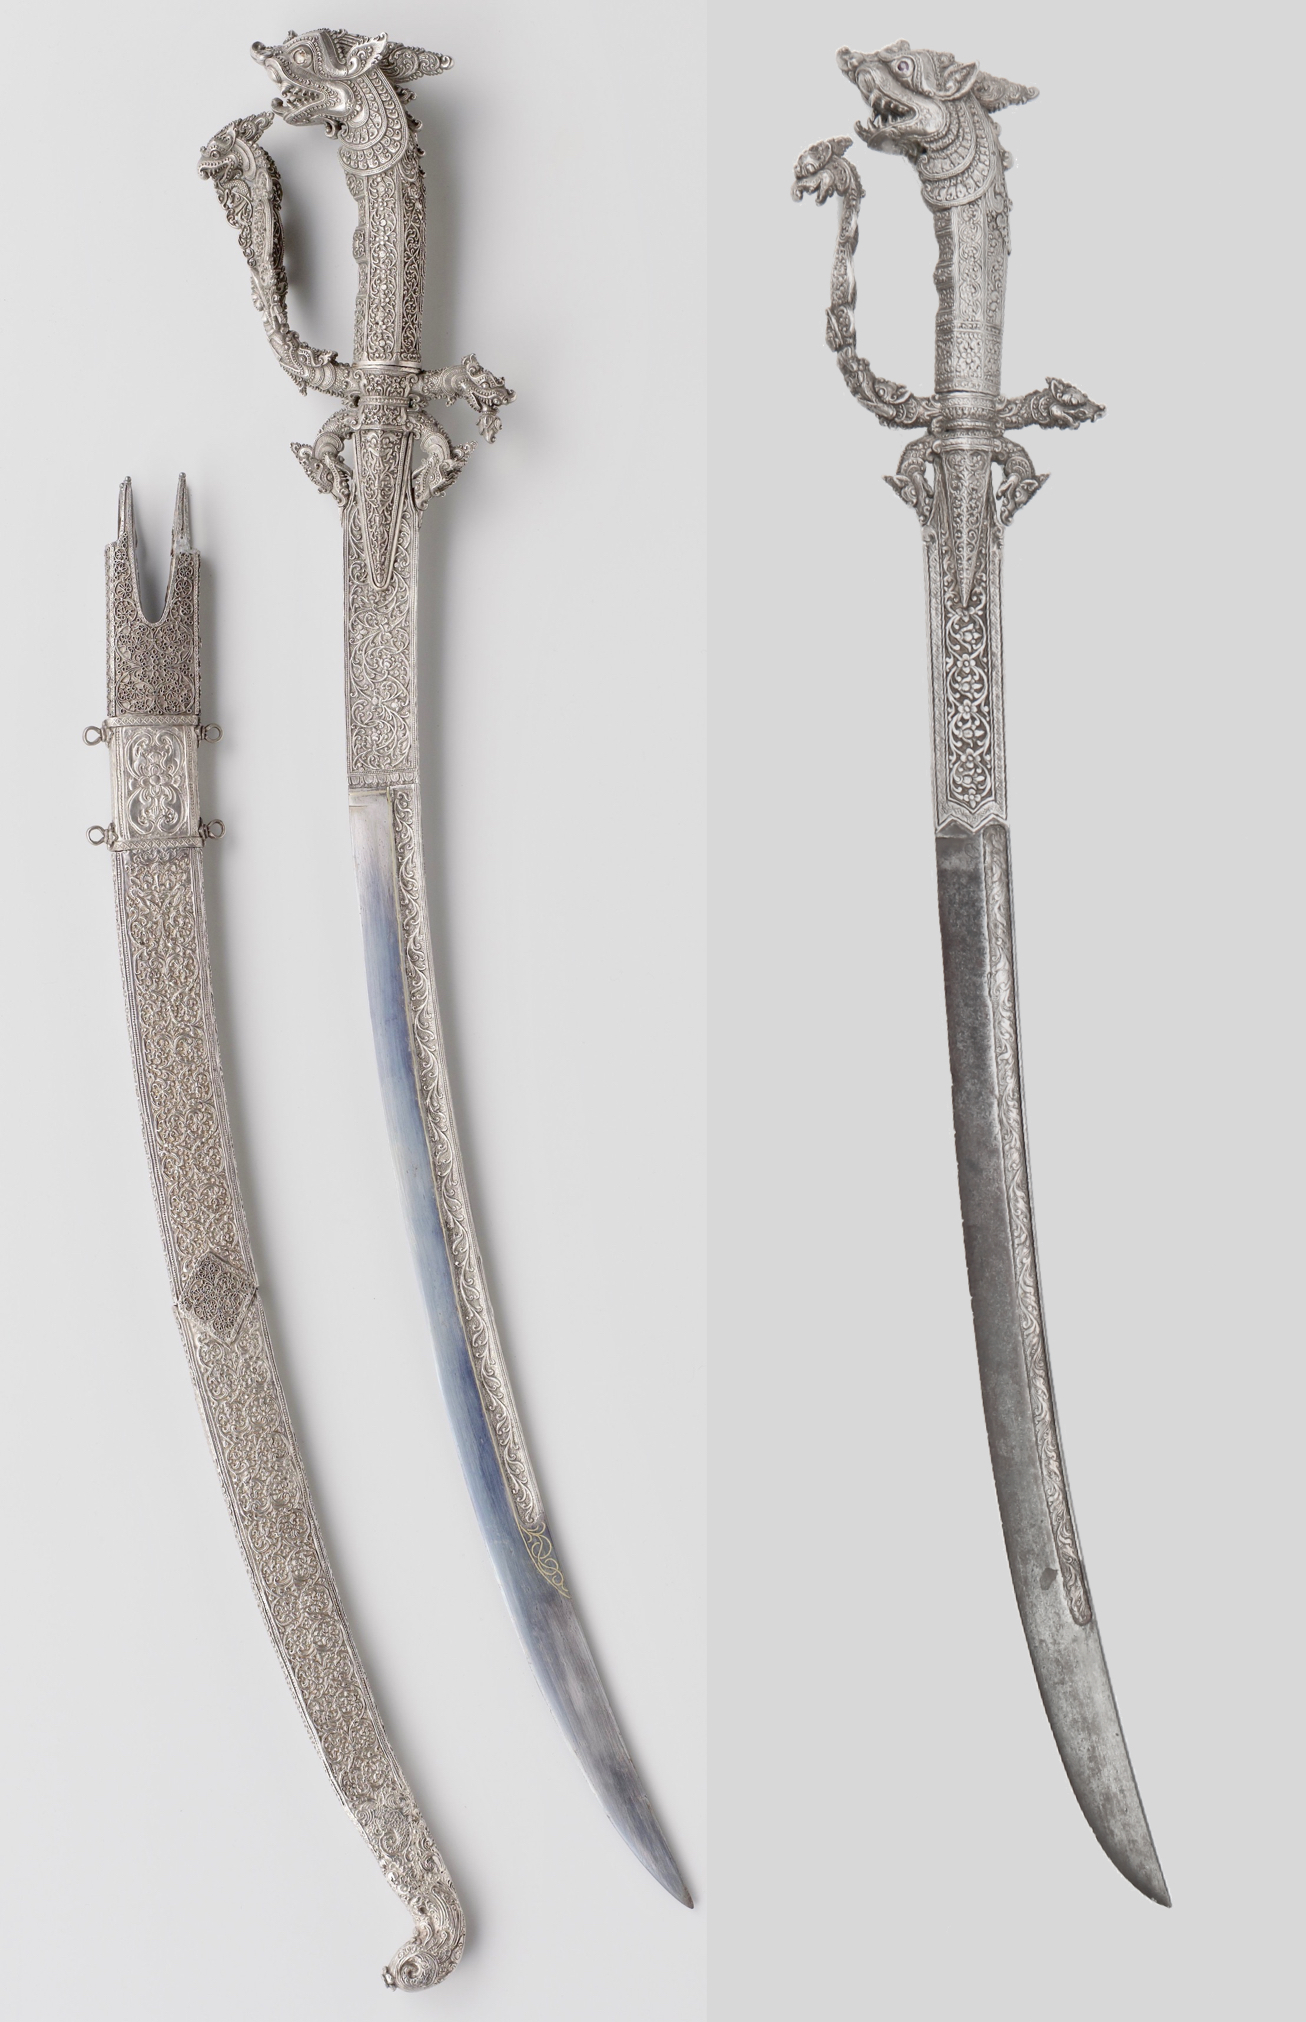 Two silver clad kasthane. One in the Rijksmuseum in Amsterdam, the other sold by Mandarin Mansion.